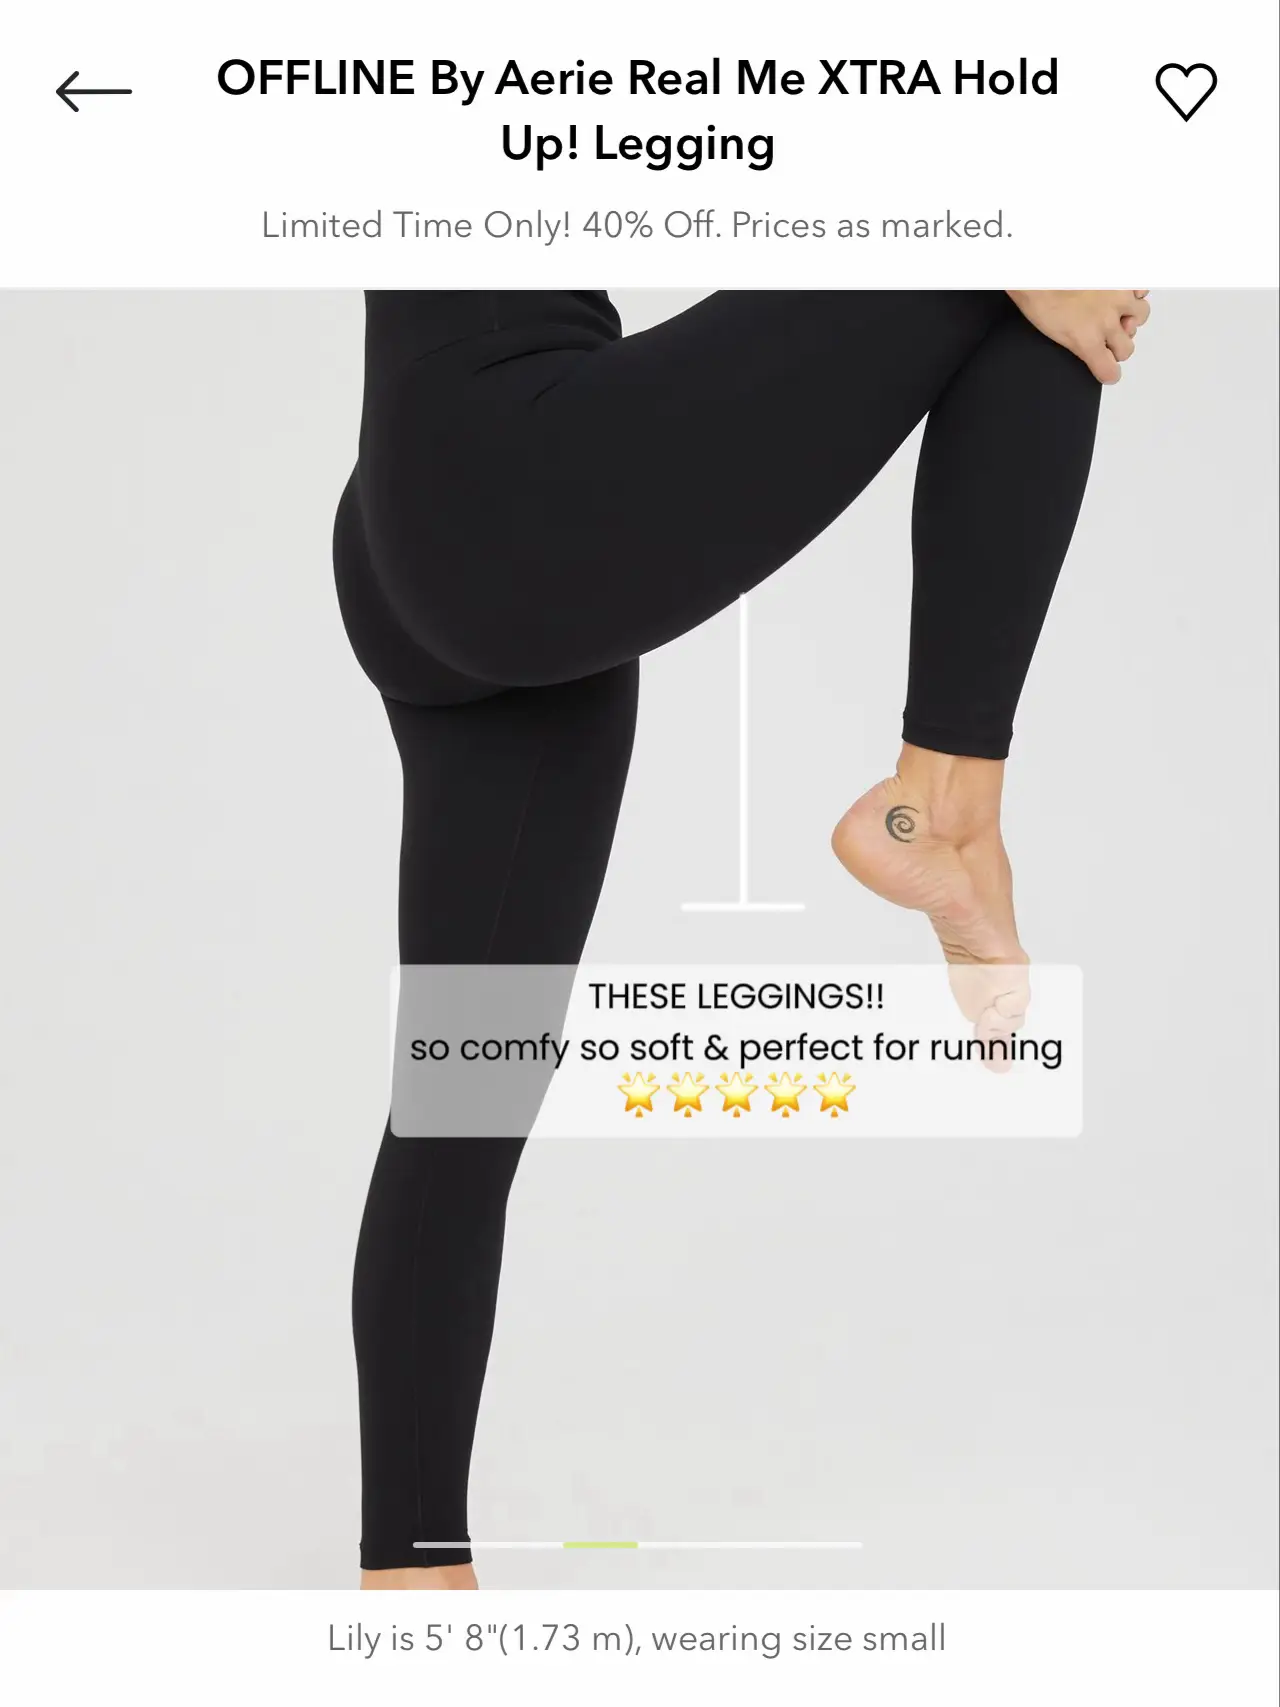 aerie xtra hold up legging - Lemon8 Search